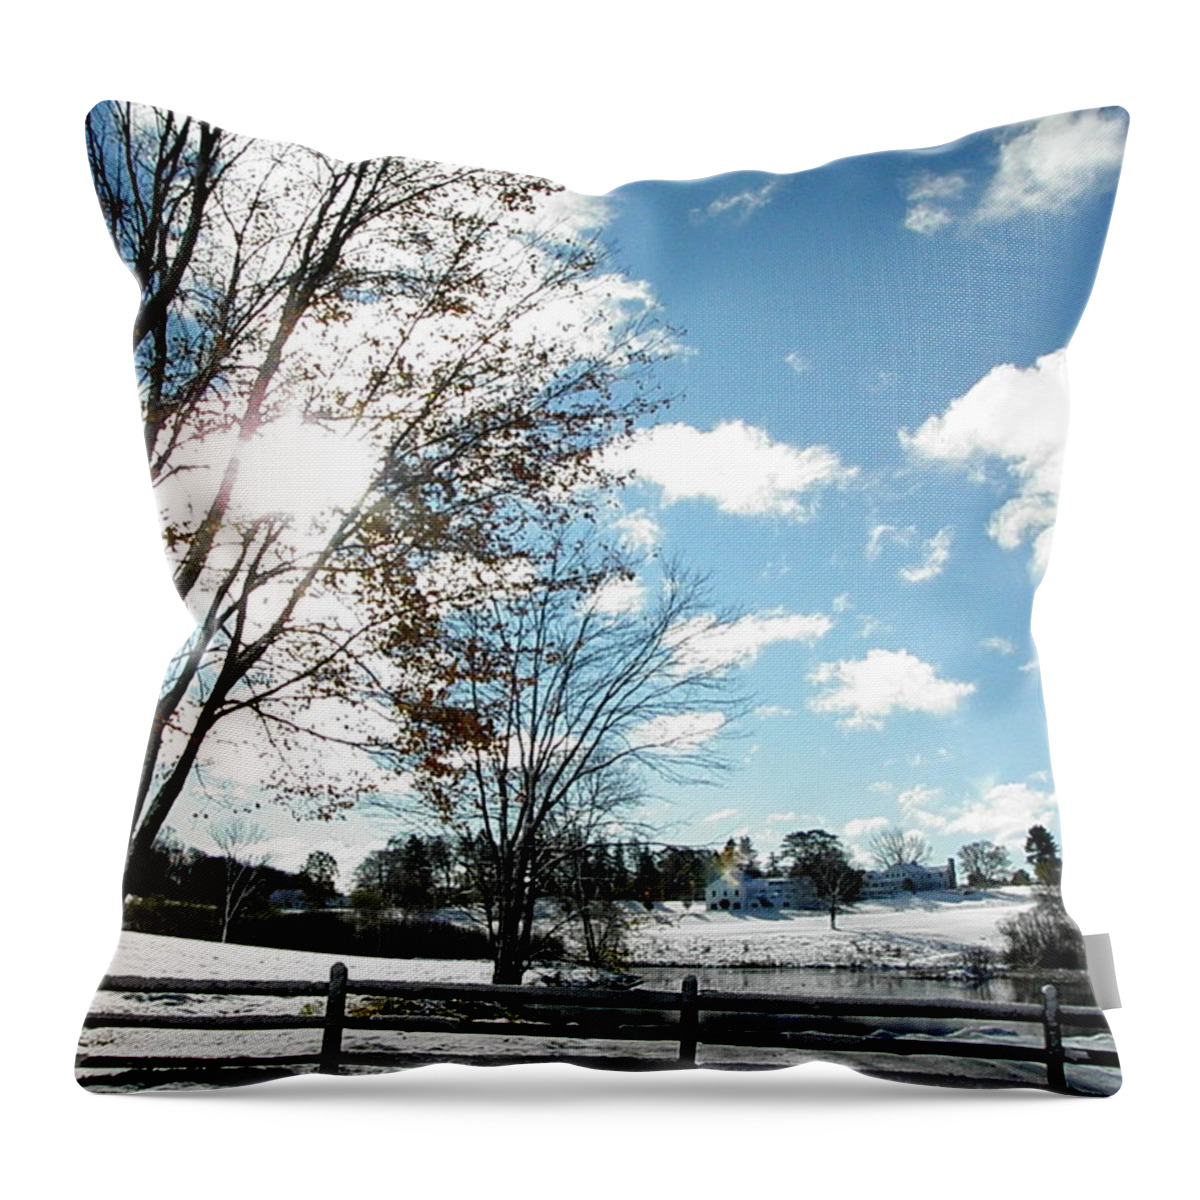 Snow Throw Pillow featuring the photograph A Colorful Snowy Landscape by Kim Galluzzo